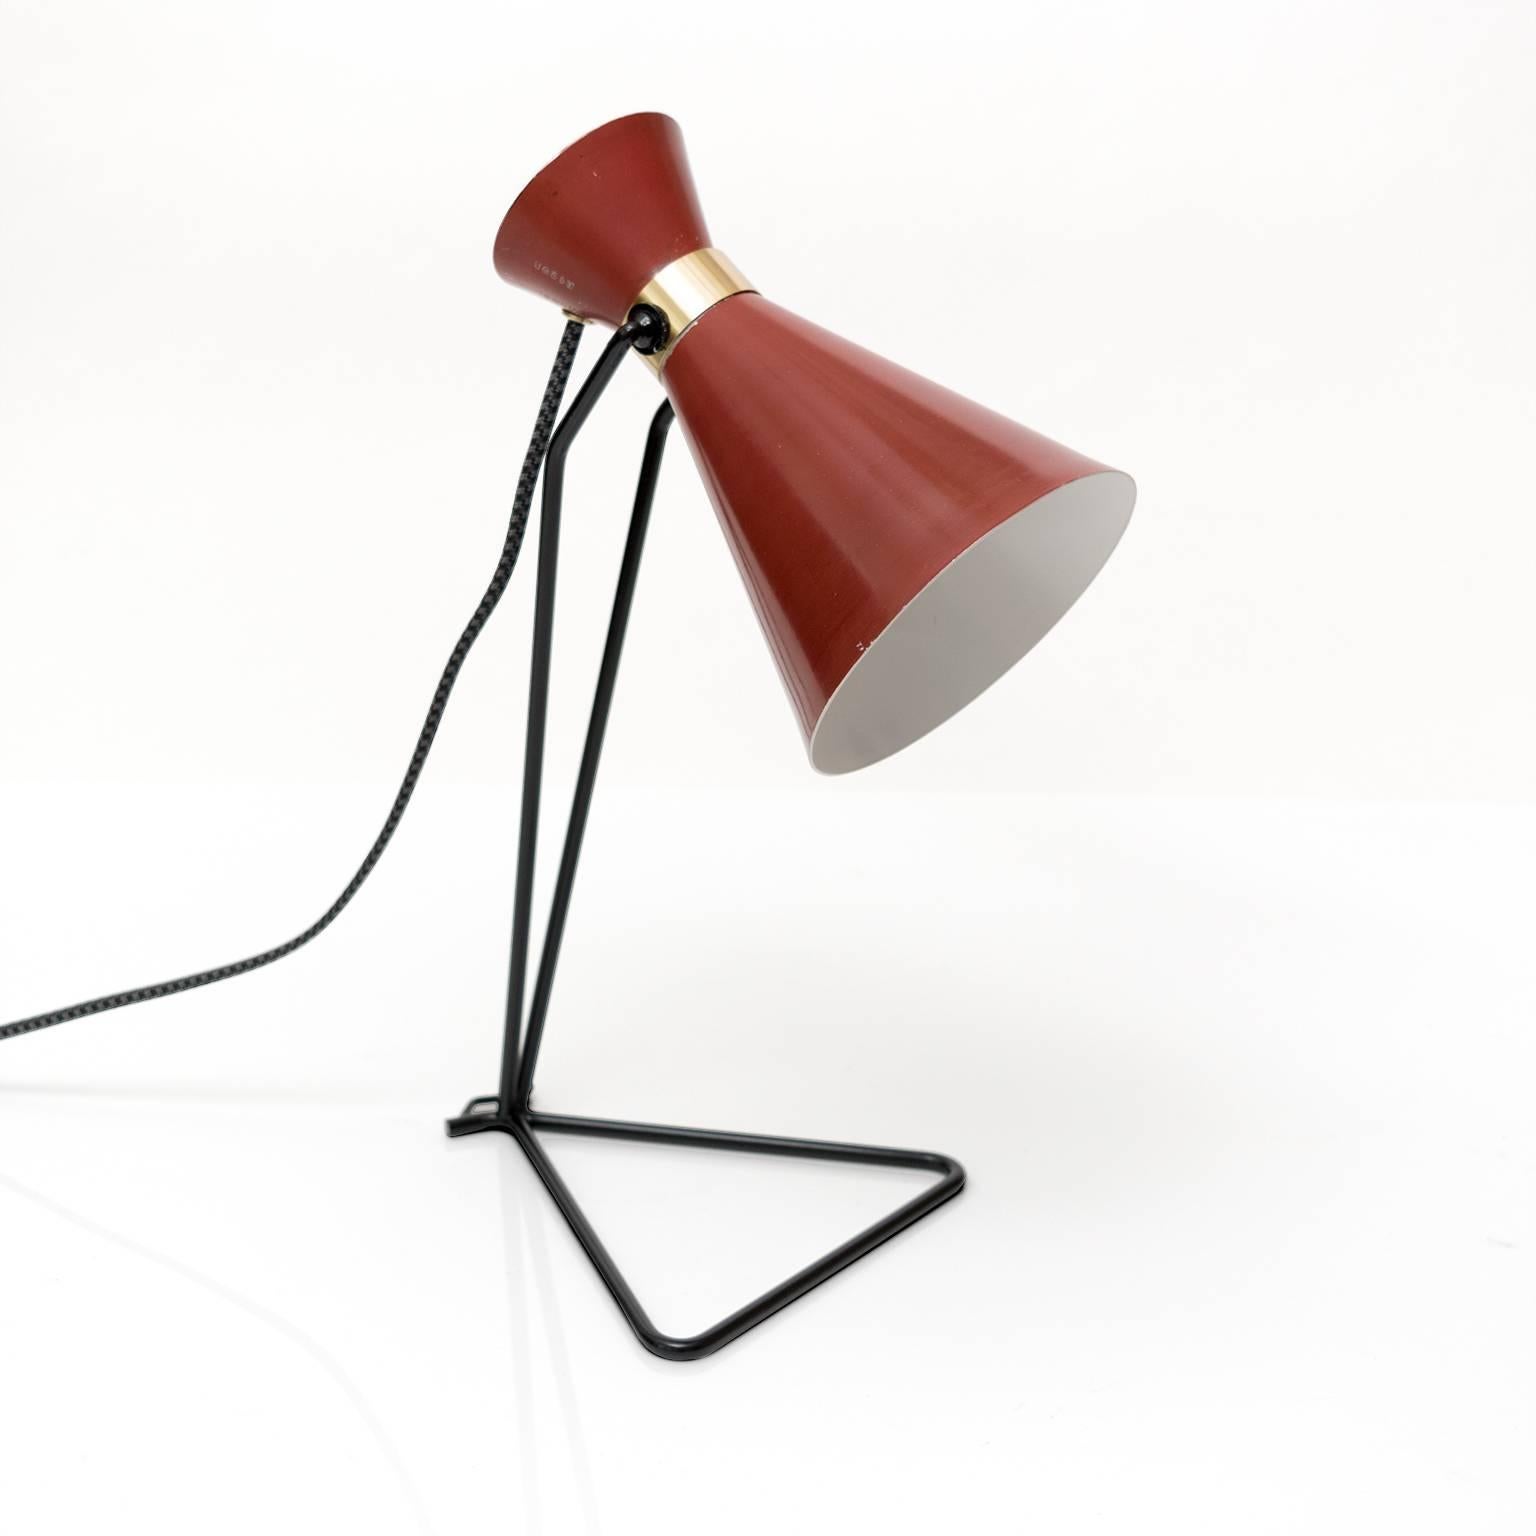 A Scandinavian Modern desk lamp by Svend Aage Holm Sorensen for the lighting company ASEA. The lamp retains ifs original red paint on the adjustable shade which is detailed with a newly polished and lacquered brass band. Newly electrified with one